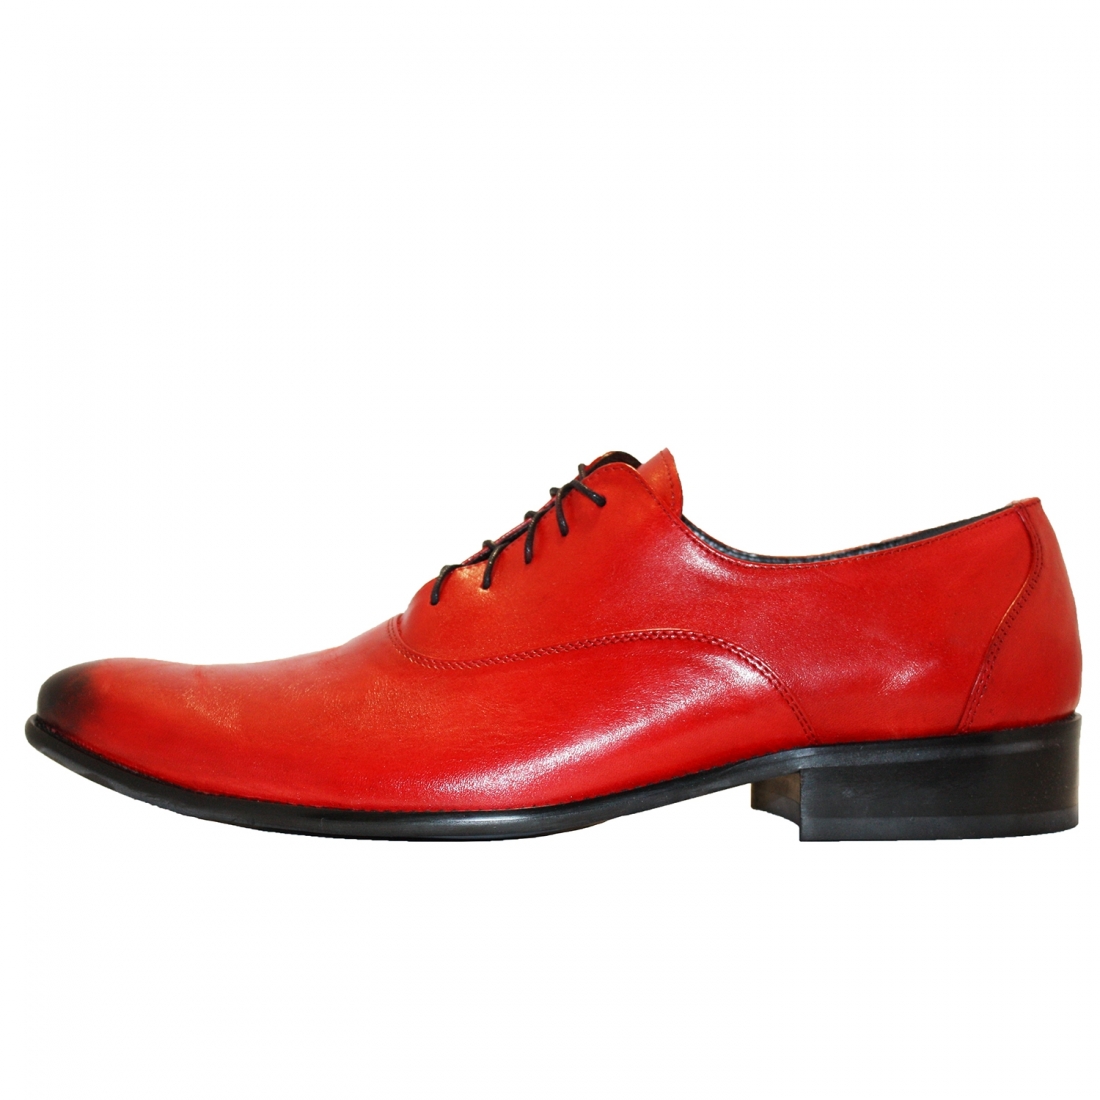 Modello No. 2 - Red Lace-Up Oxfords Dress Shoes Modello - Cowhide ...